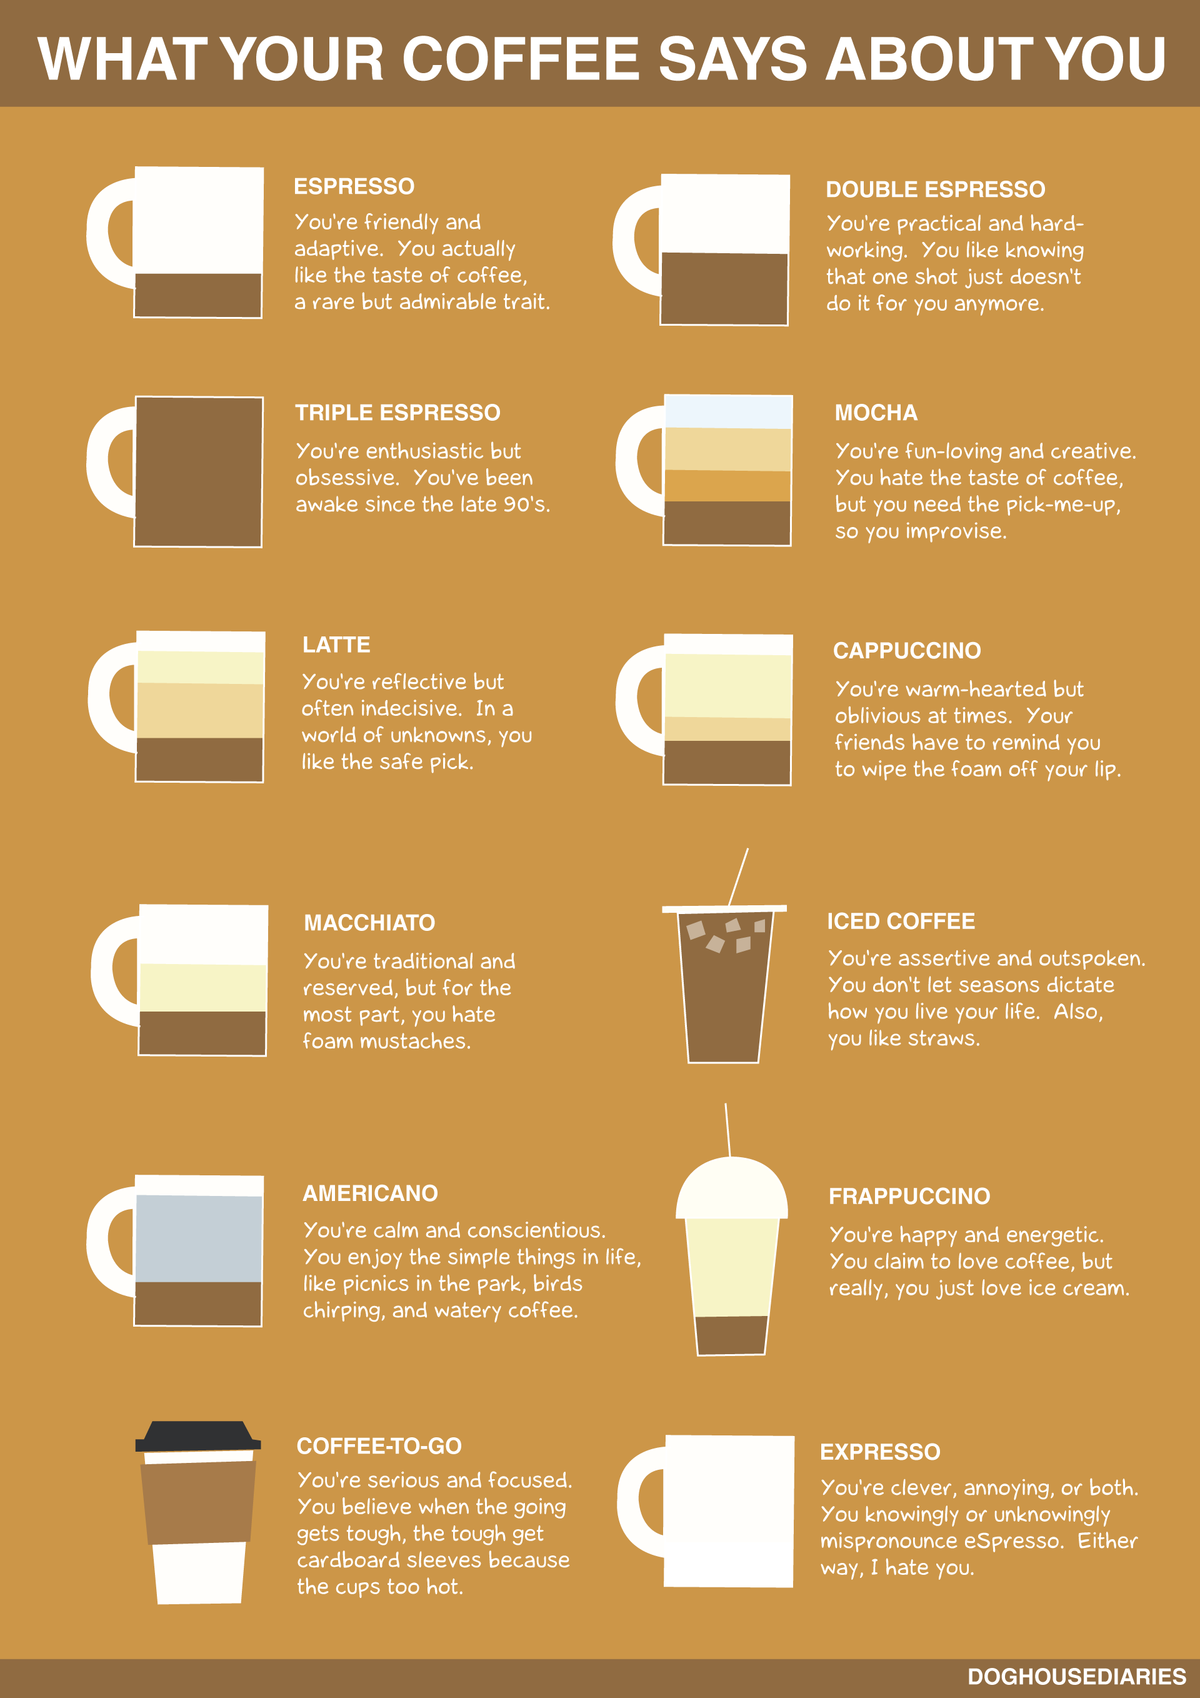 Coffee-Says-About-You